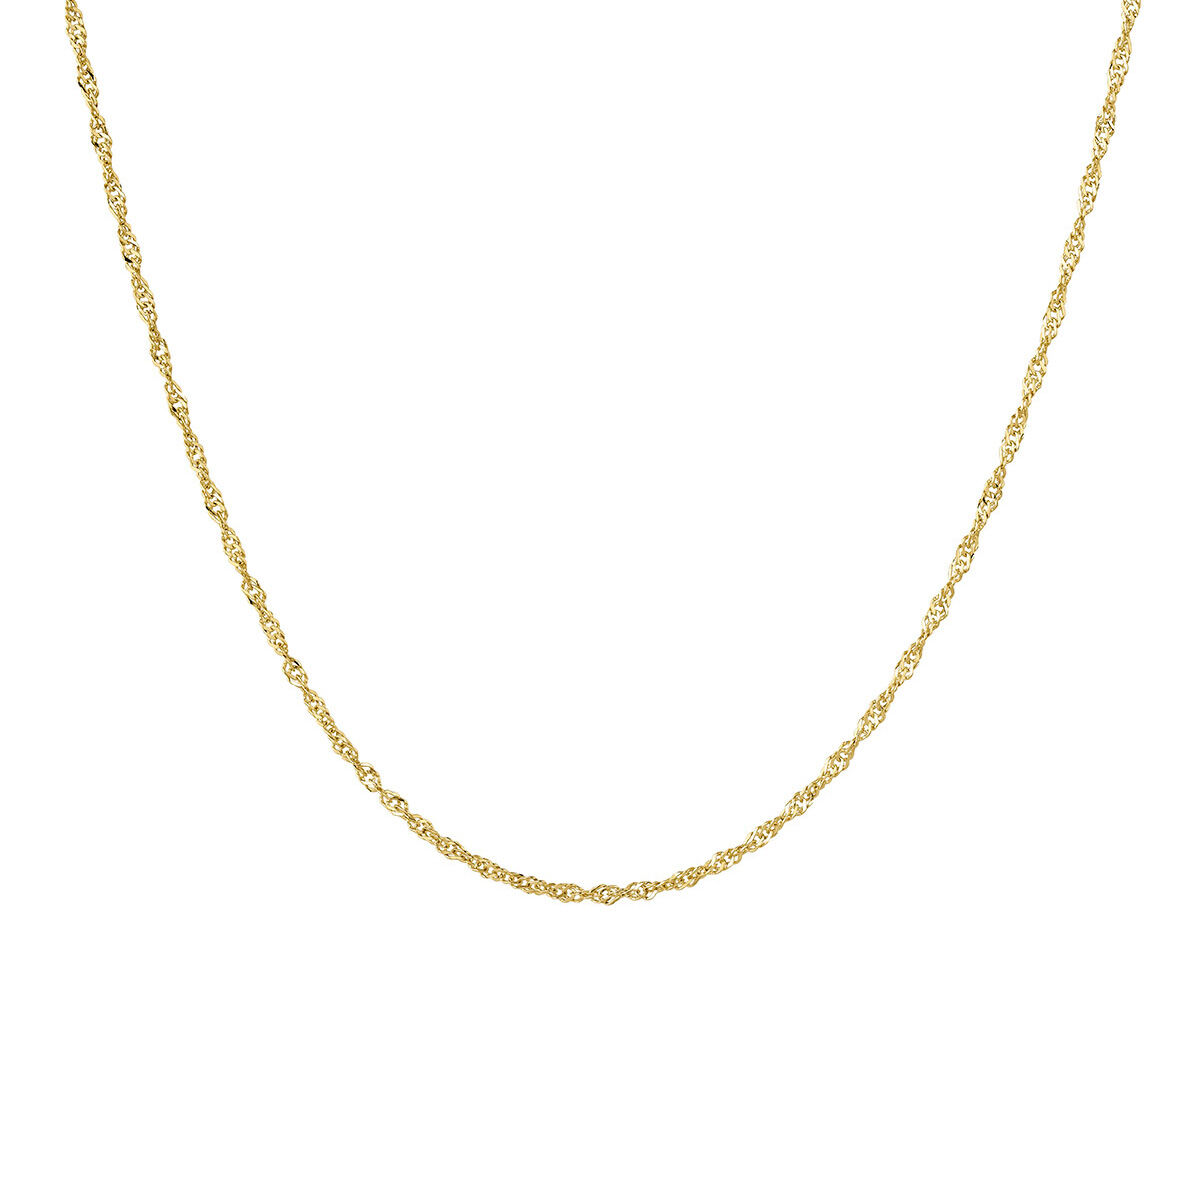 Thin snake chain in 9k yellow gold, J05333-02, hi-res